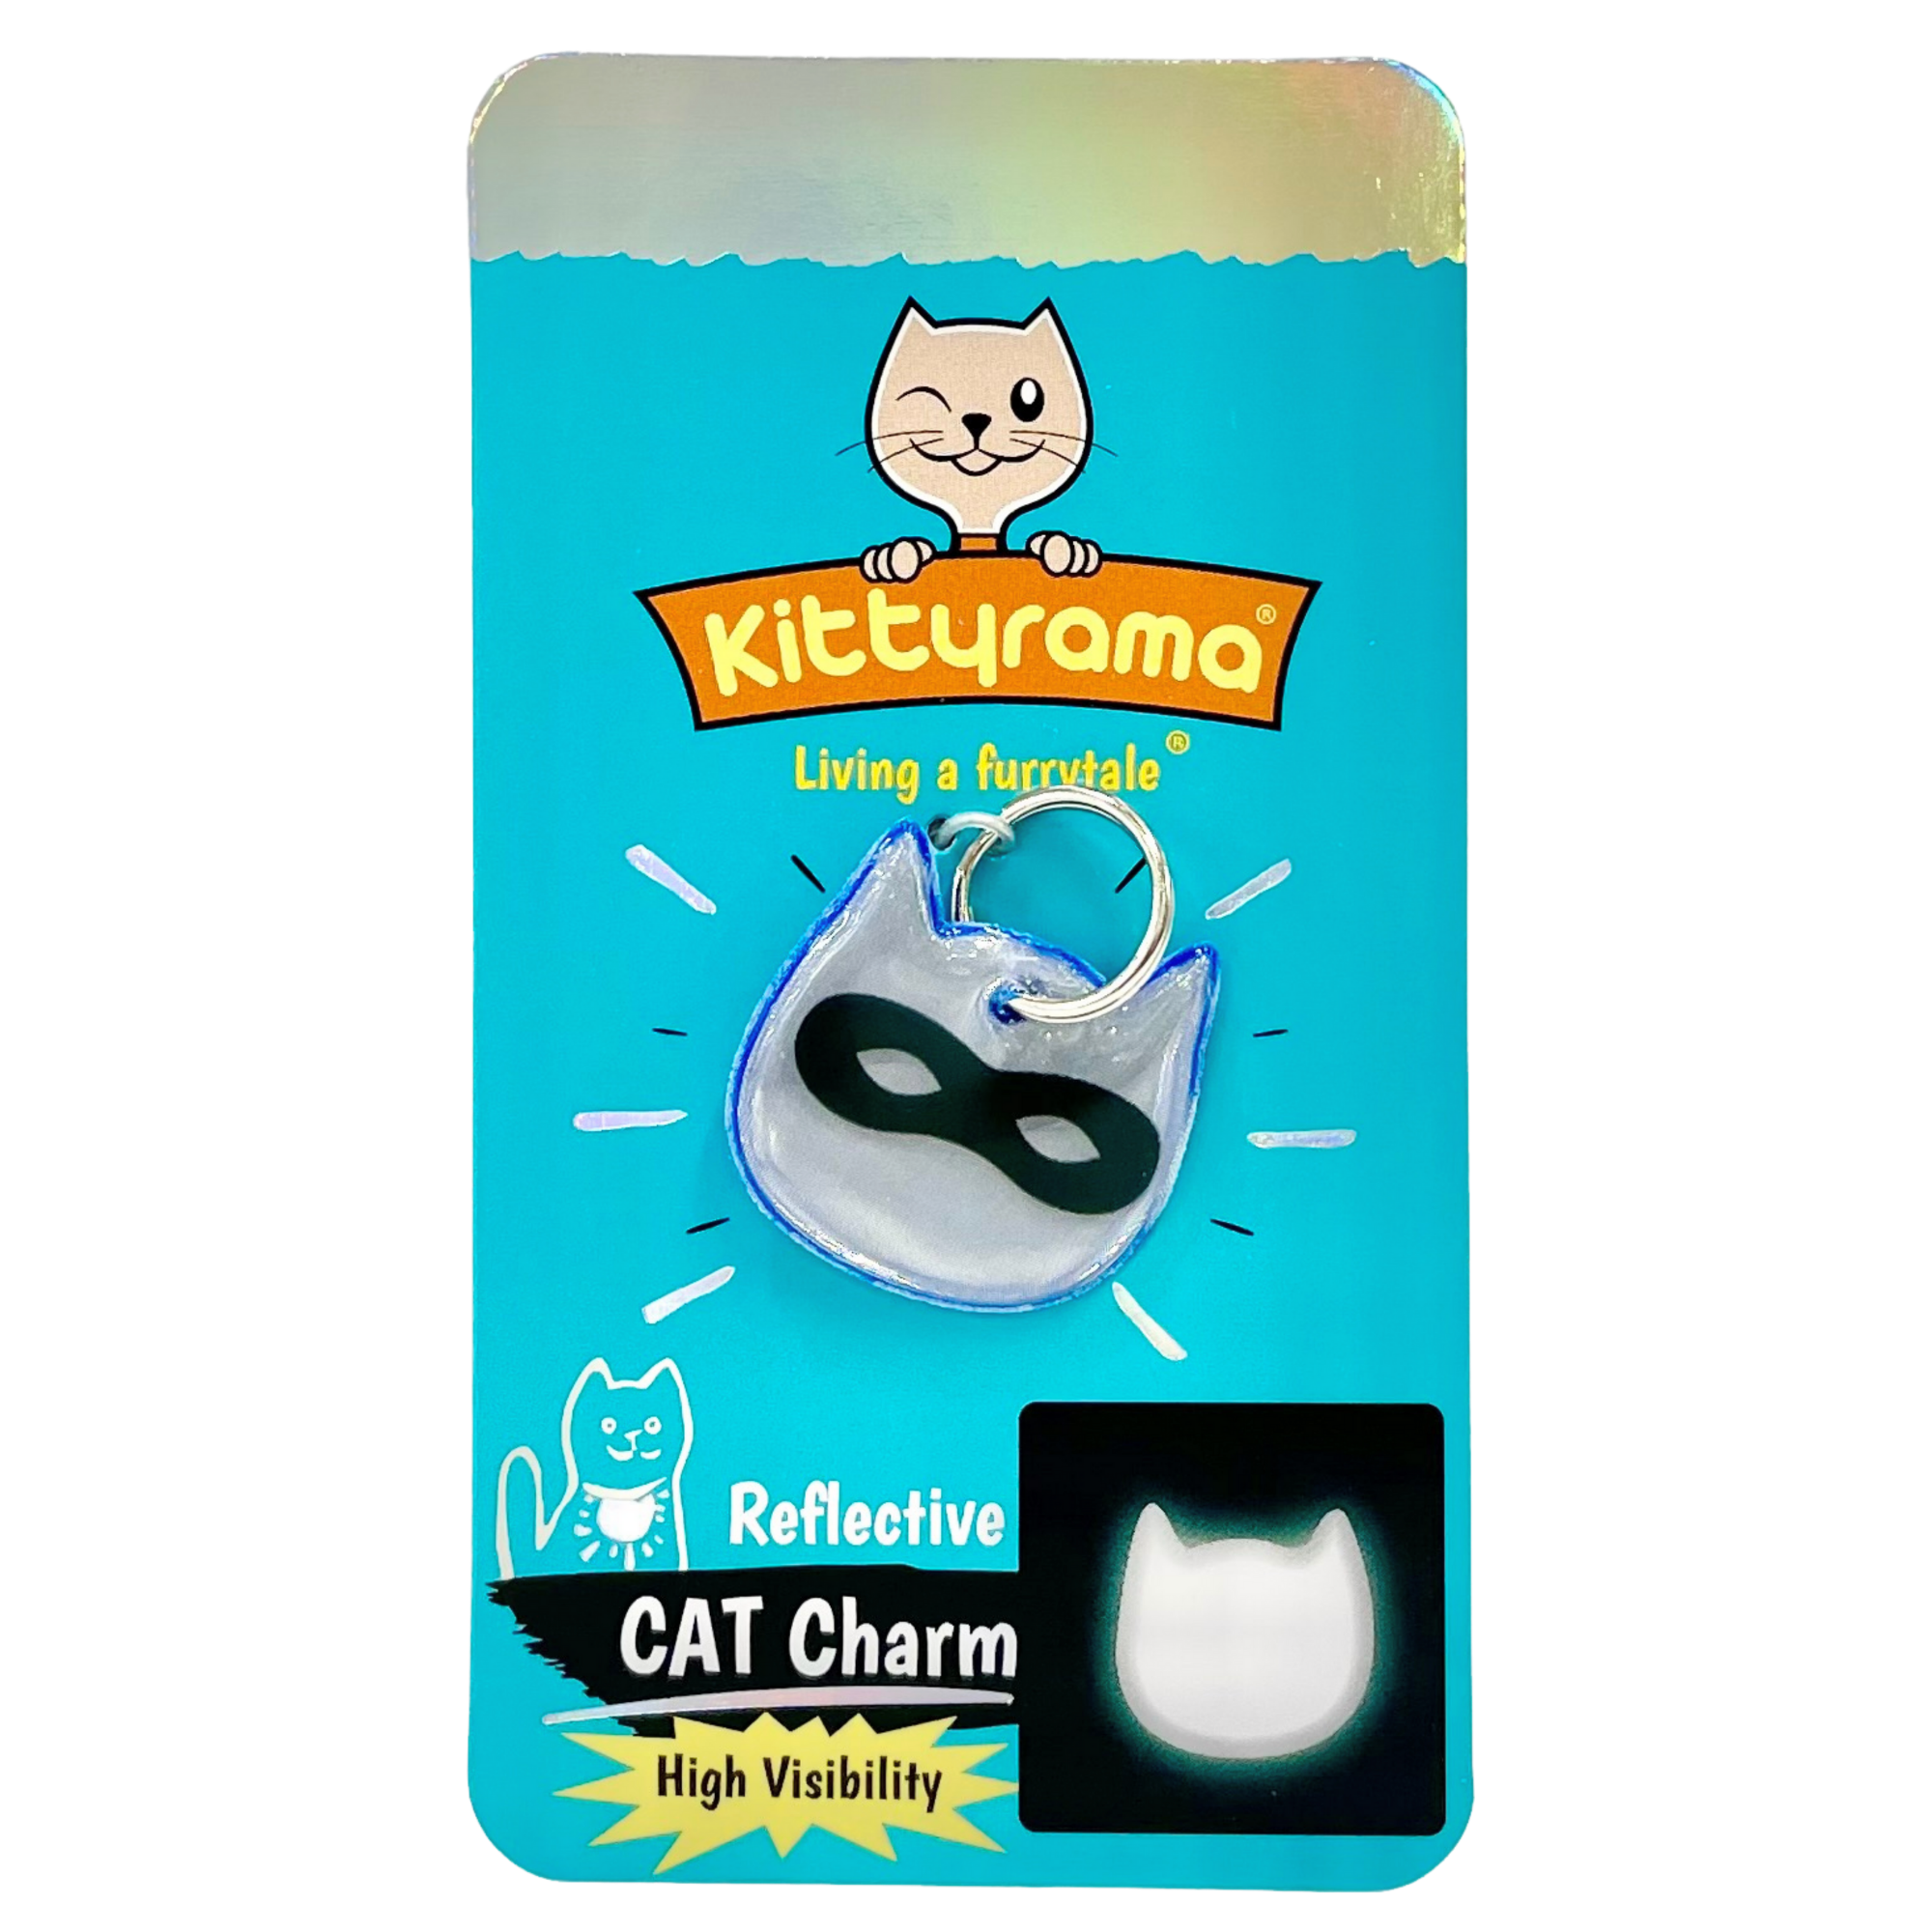 Kittyrama Reflective Cat Charm Fits All Reflective Cat Collars Lightweight Safety Cat Tag High Visibility Other Styles Available Waterproof 